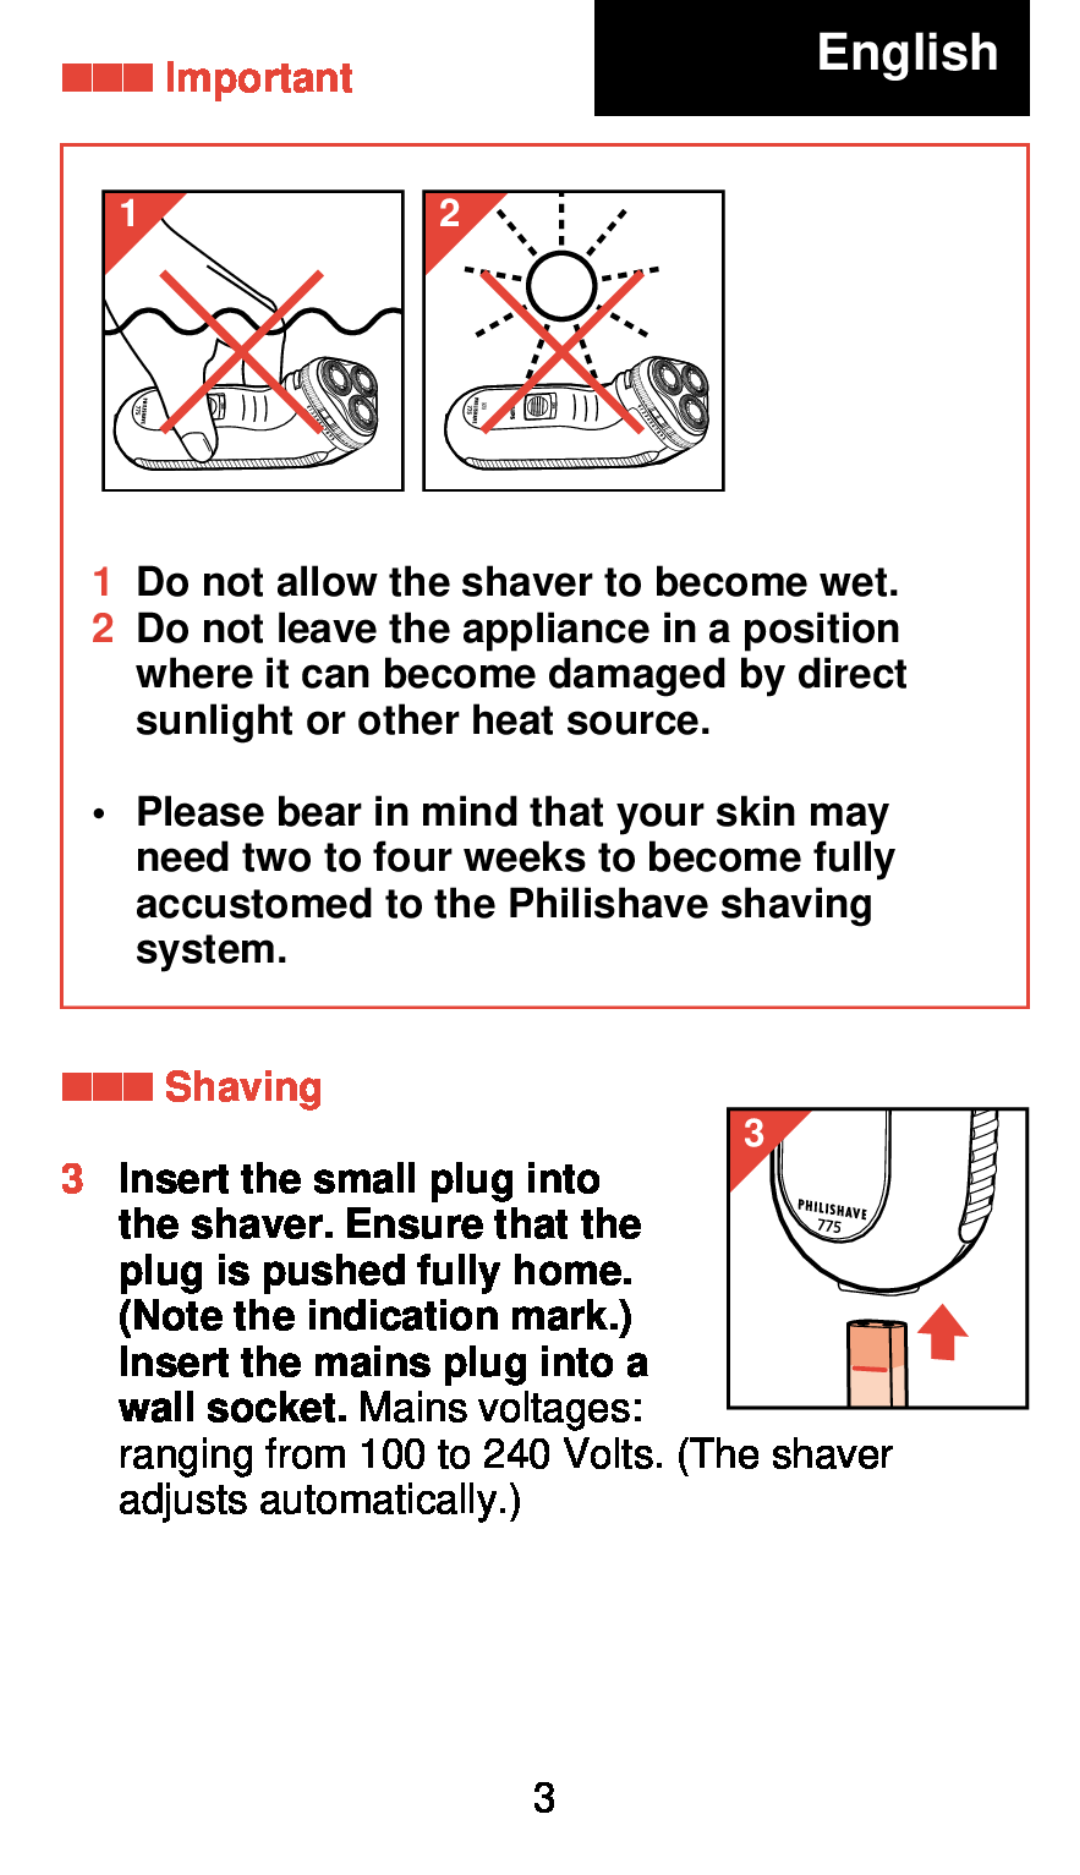 Philips 775 manual English, Shaving, 1Do not allow the shaver to become wet 